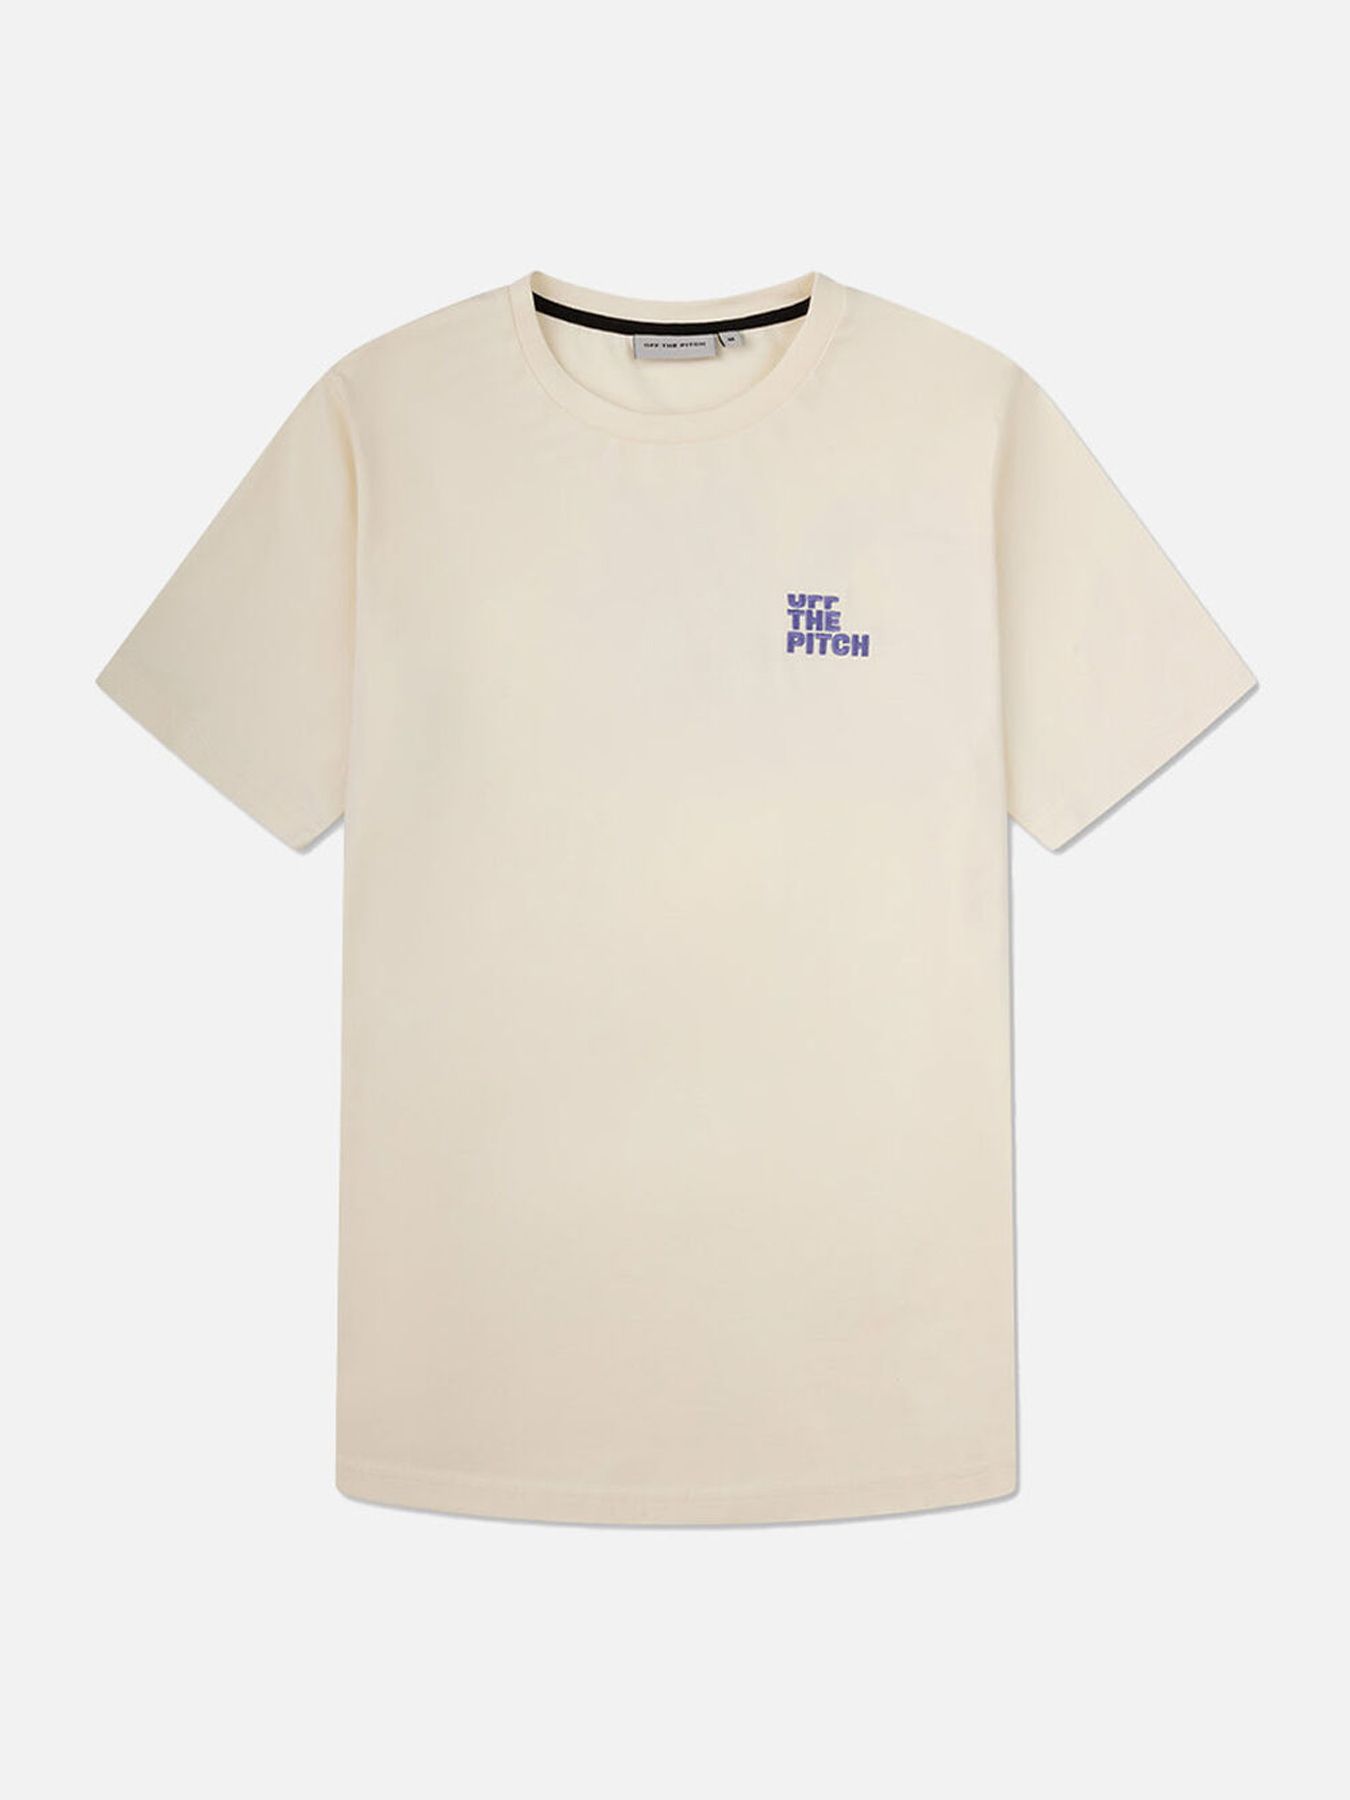 Off The Pitch Fullstop slim fit tee Off White 00108814-OFFWHITE